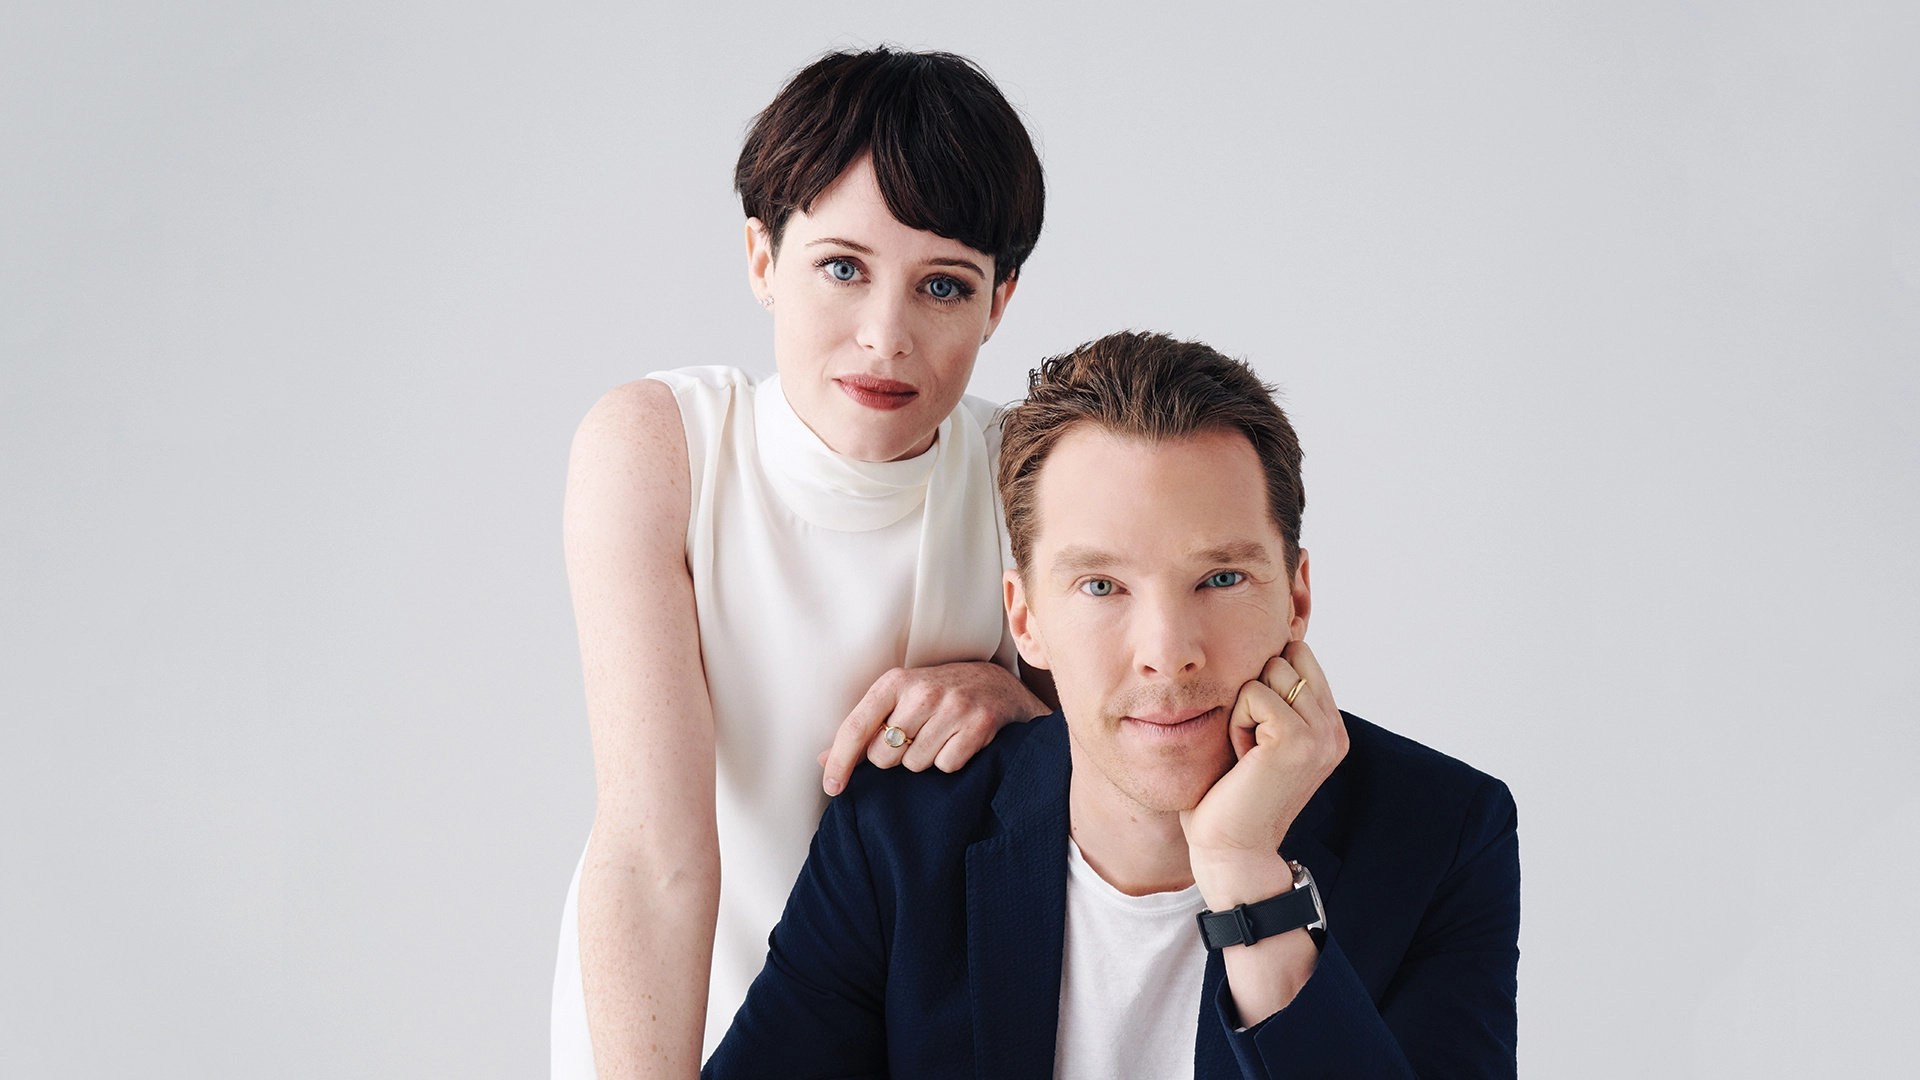 Claire Foy, Movies star, Benedict Cumberbatch collaboration, Exciting news, 1920x1080 Full HD Desktop